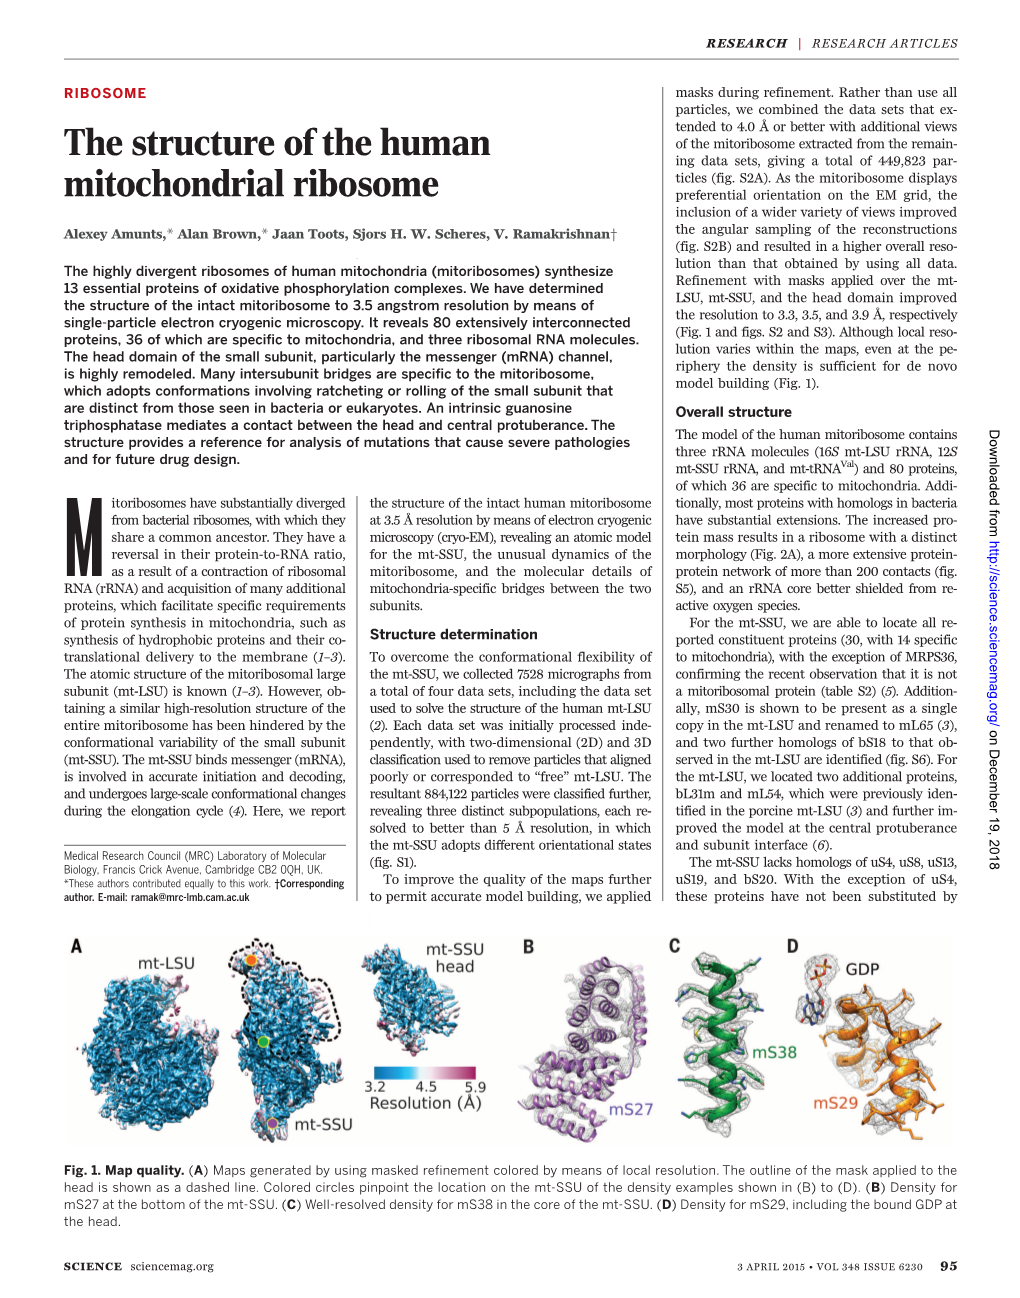 The Structure of the Human Mitochondrial Ribosome